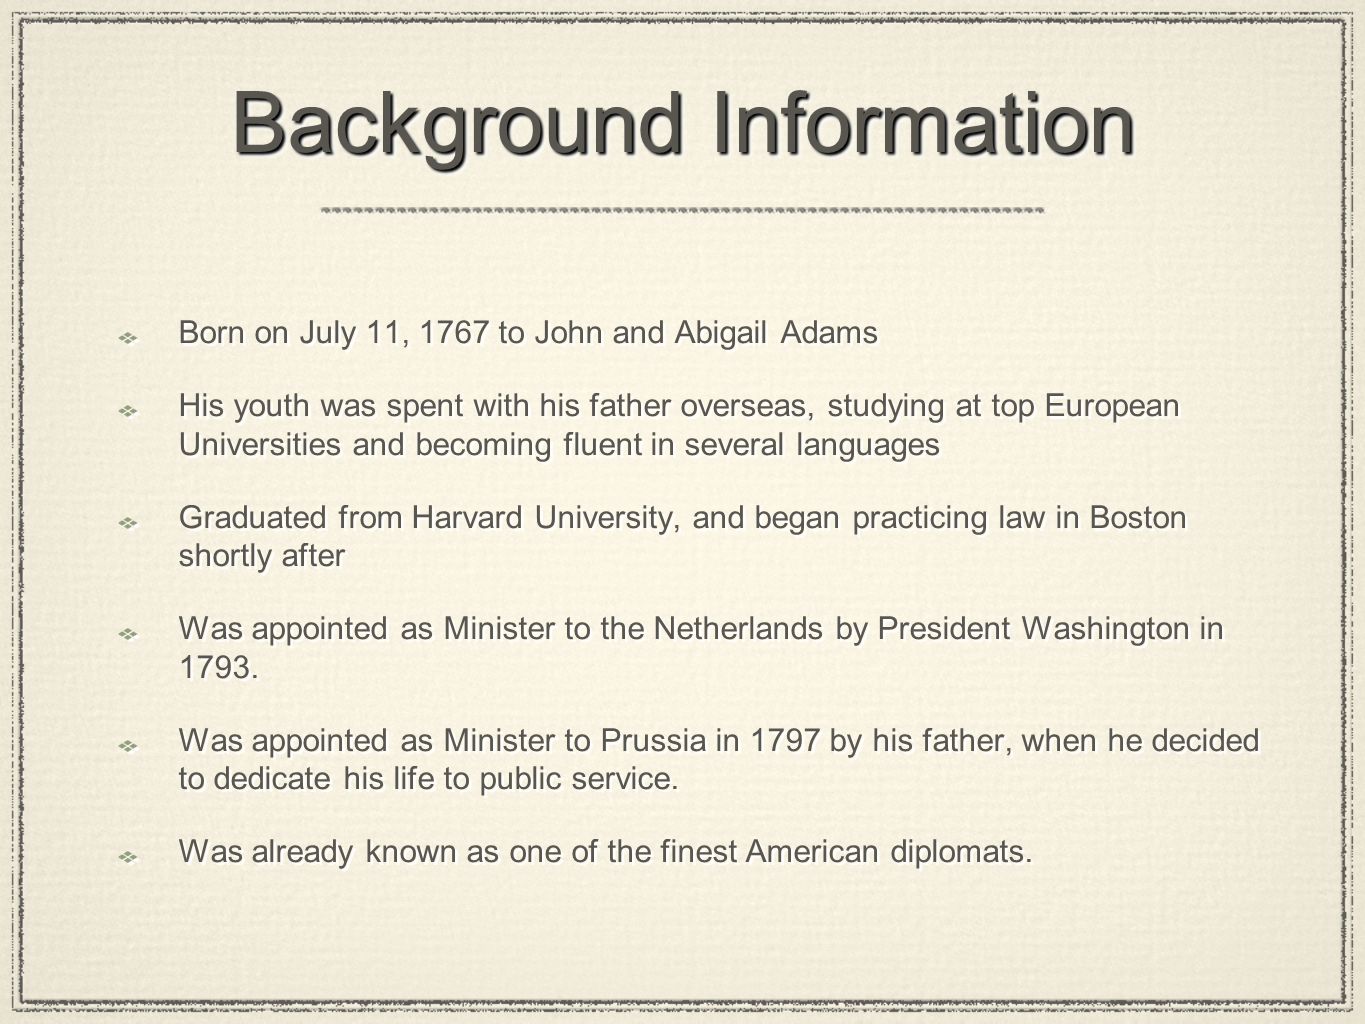 Background Information Born on July 11, 1767 to John and Abigail Adams His youth was spent with his father overseas, studying at top European Universities and becoming fluent in several languages Graduated from Harvard University, and began practicing law in Boston shortly after Was appointed as Minister to the Netherlands by President Washington in 1793.